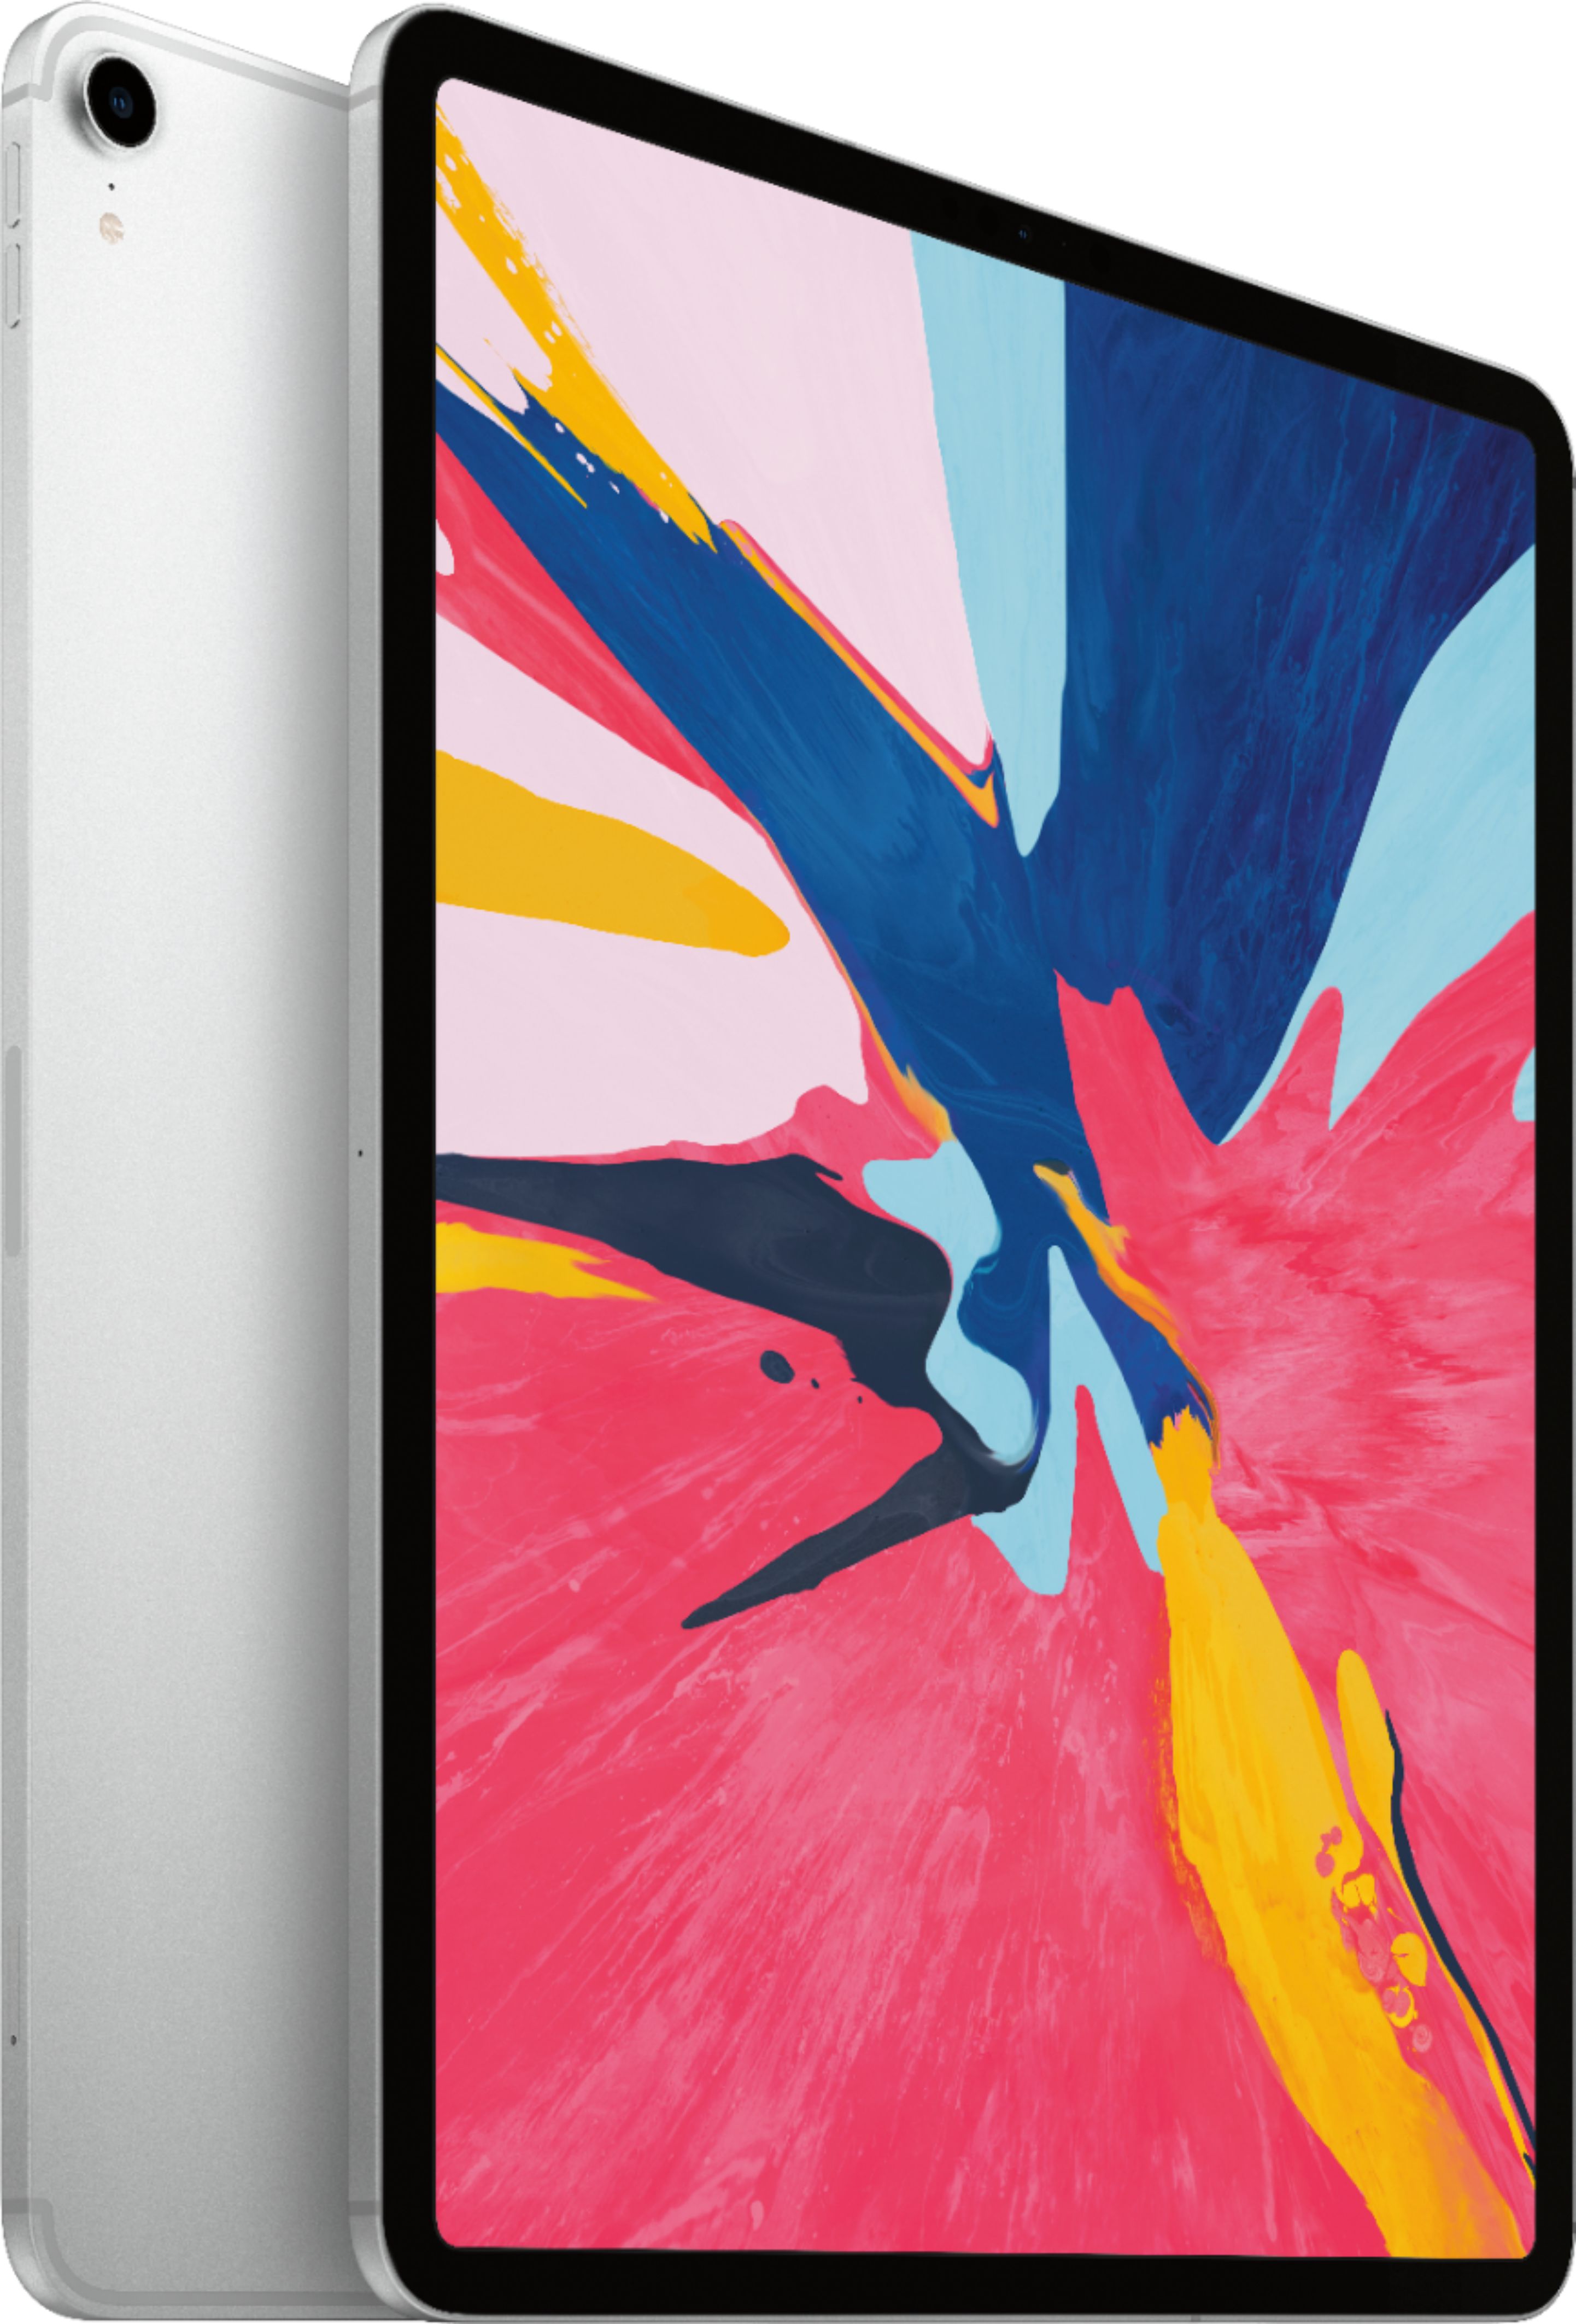 Angle View: Apple - 11-Inch iPad Pro (2nd Generation) with Wi-Fi + Cellular - 1TB (Unlocked) - Space Gray